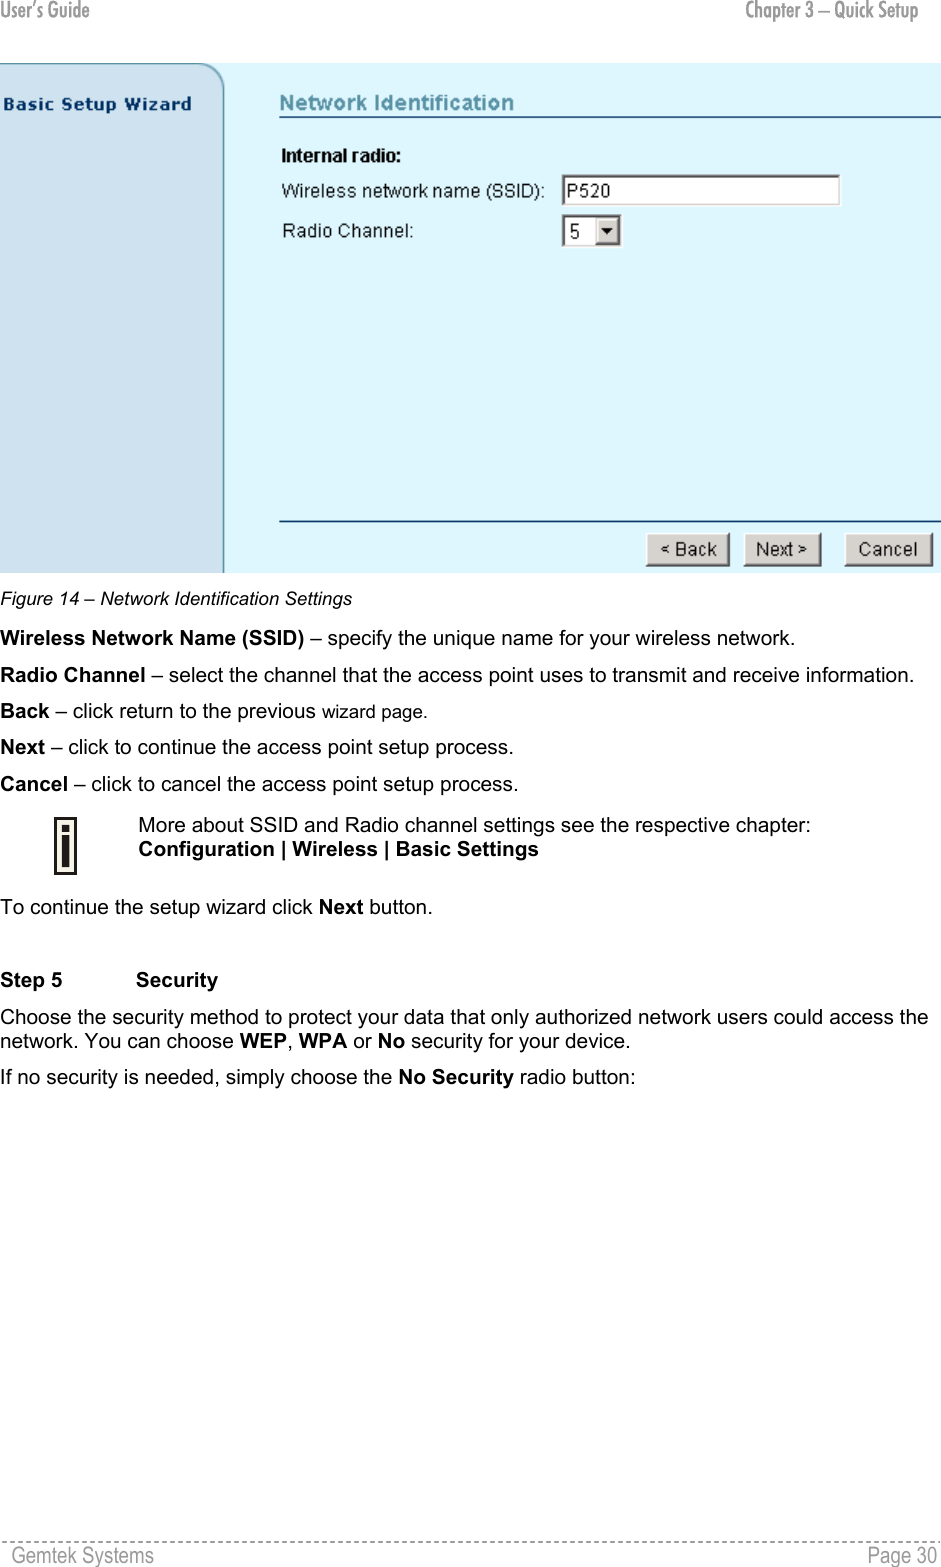 User’s Guide  Chapter 3 – Quick Setup  Figure 14 – Network Identification Settings Wireless Network Name (SSID) – specify the unique name for your wireless network. Radio Channel – select the channel that the access point uses to transmit and receive information. Back – click return to the previous wizard page. Next – click to continue the access point setup process. Cancel – click to cancel the access point setup process.  More about SSID and Radio channel settings see the respective chapter: Configuration | Wireless | Basic Settings To continue the setup wizard click Next button.   Step 5  Security Choose the security method to protect your data that only authorized network users could access the network. You can choose WEP, WPA or No security for your device. If no security is needed, simply choose the No Security radio button: Gemtek Systems    Page 30  